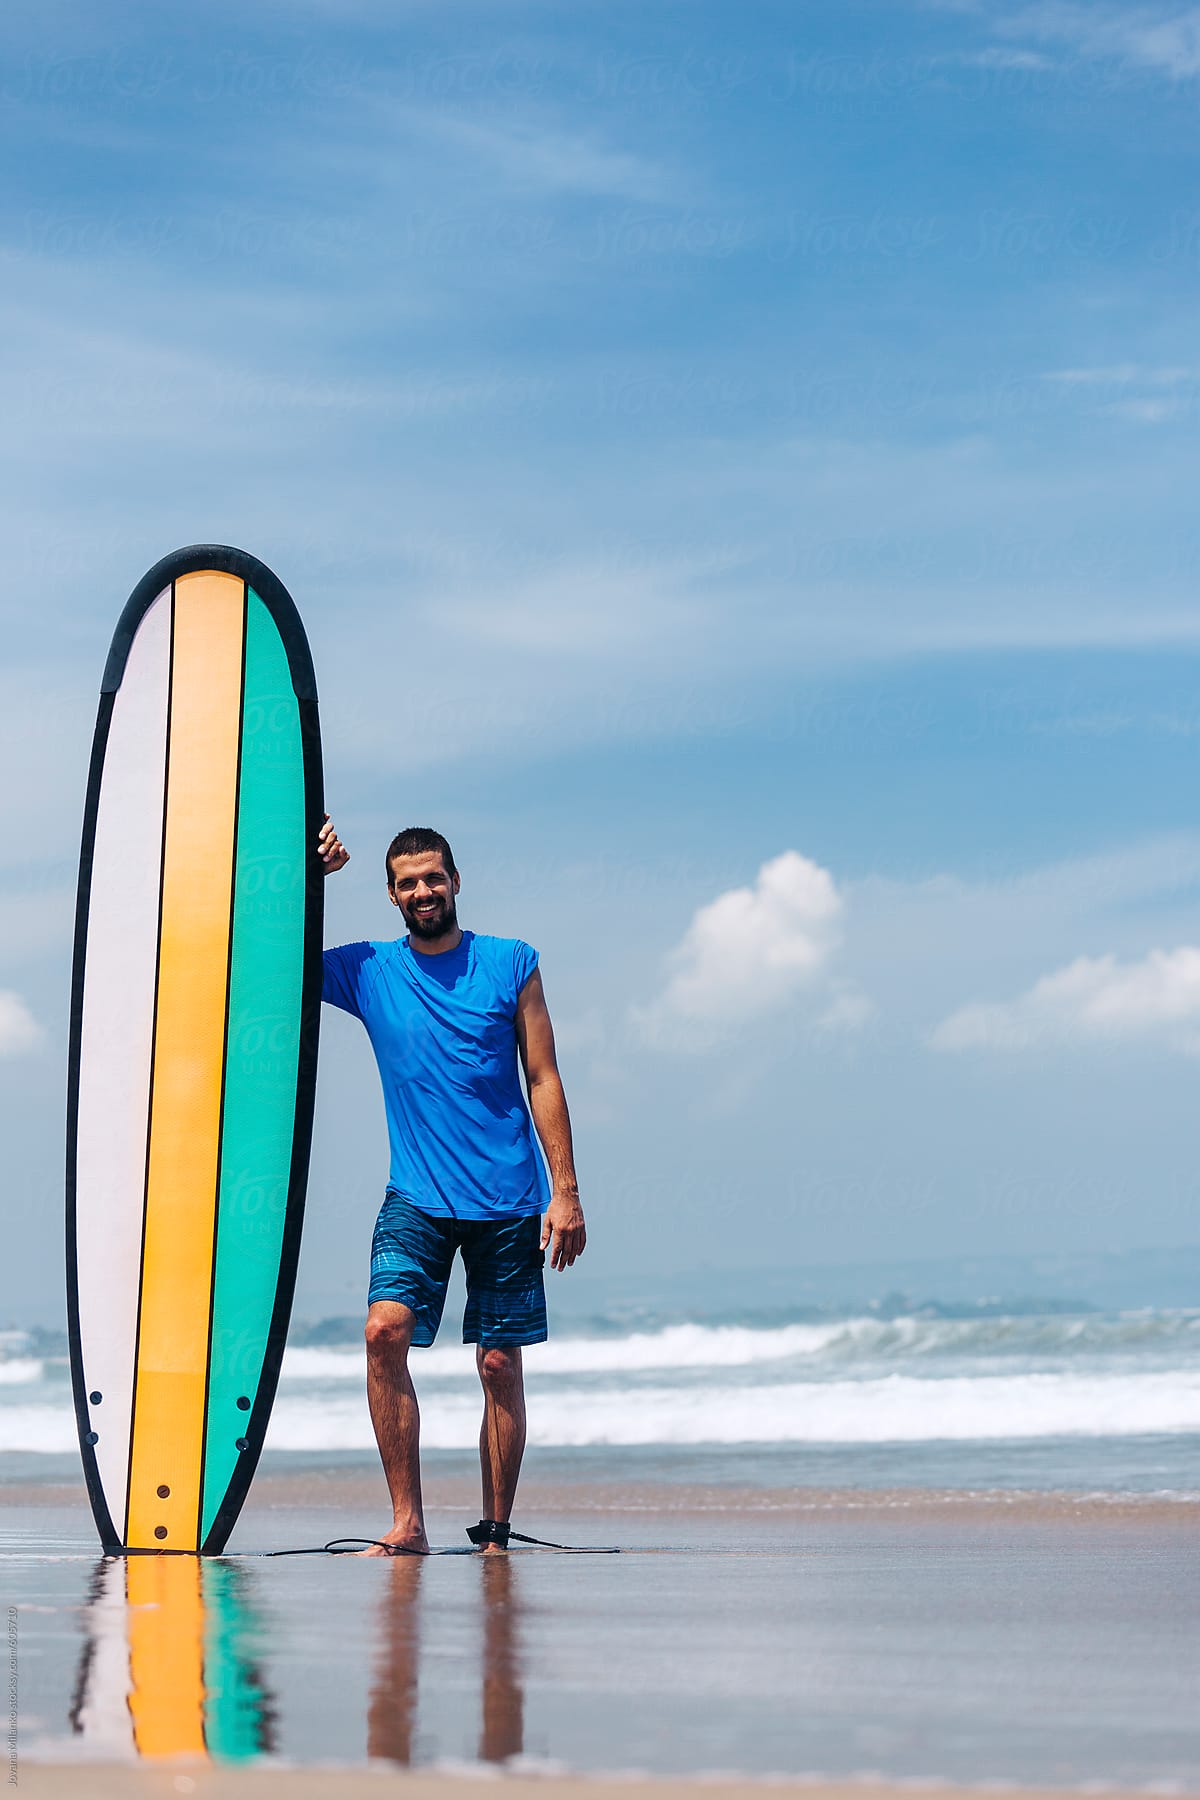 Young surfer standing next to a longboard at a surfing beach